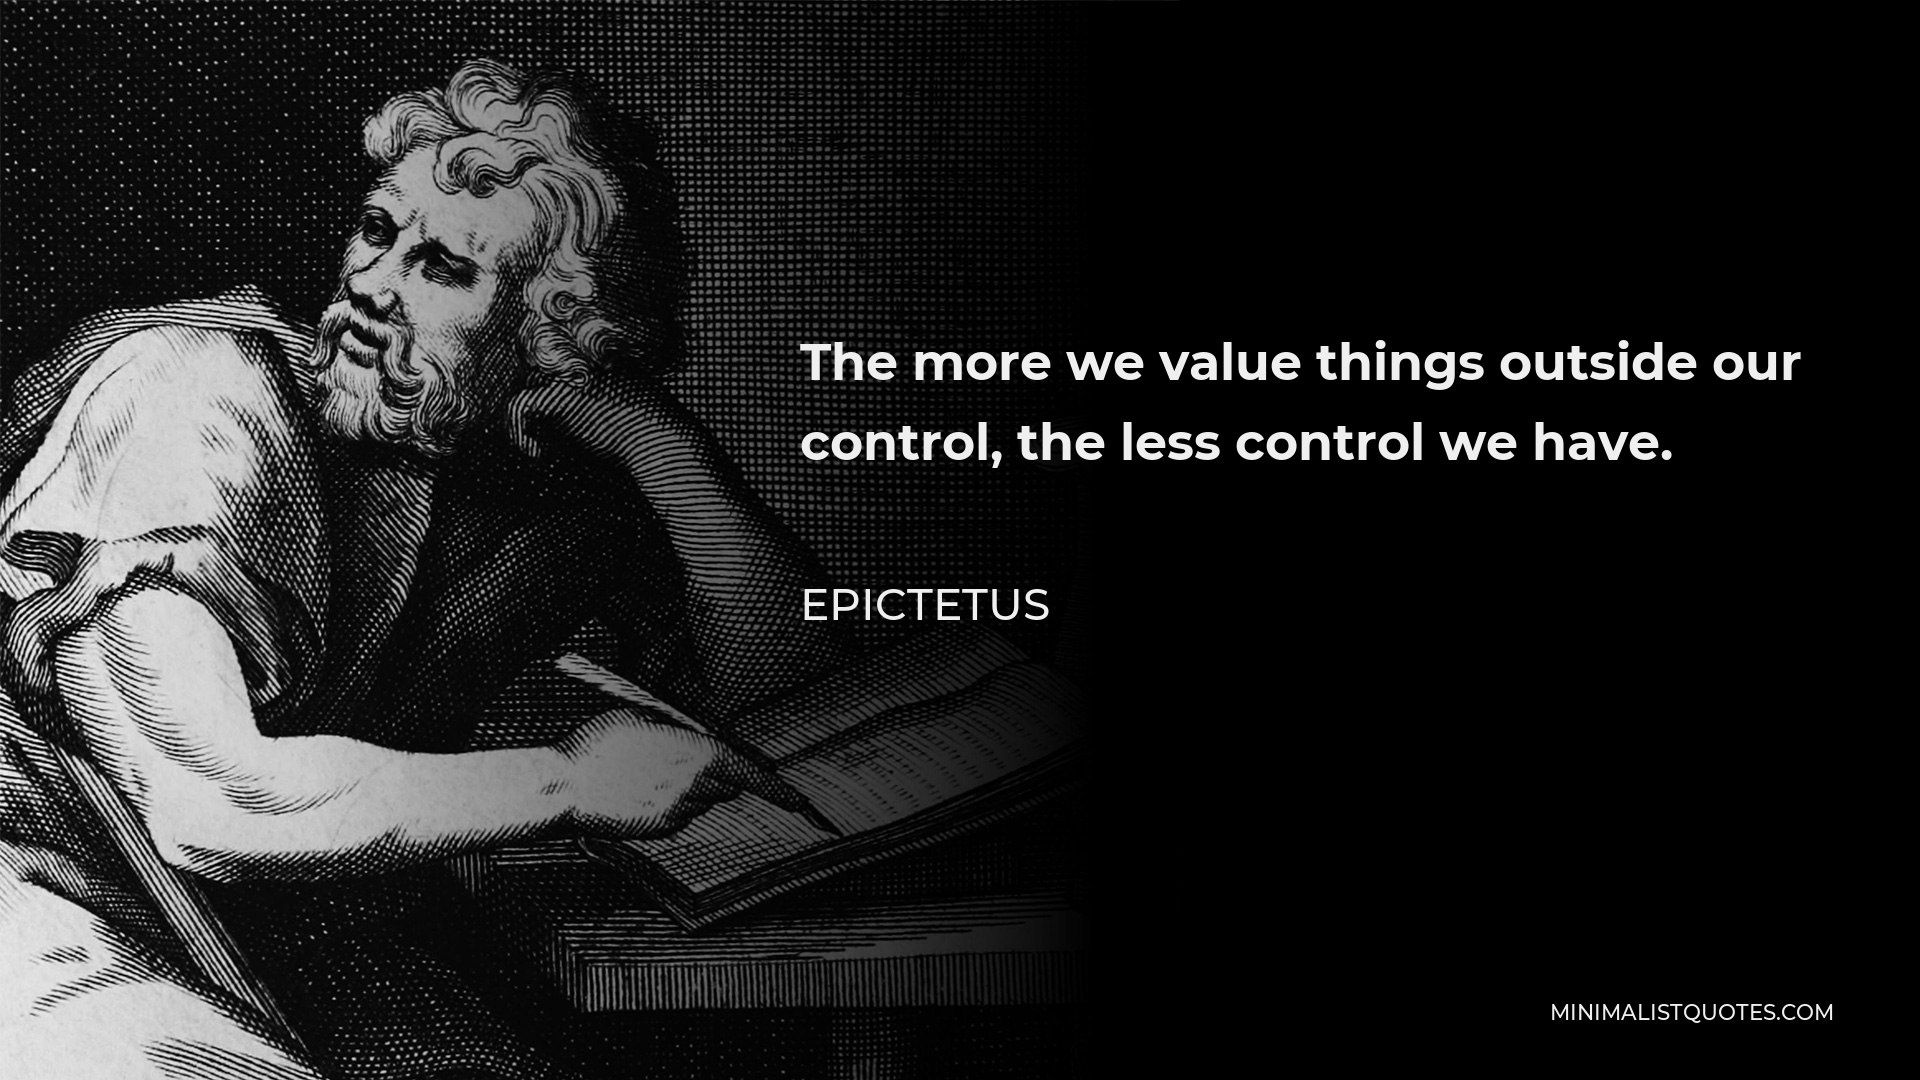 Epictetus Quote - The more we value things outside our control, the less control we have.